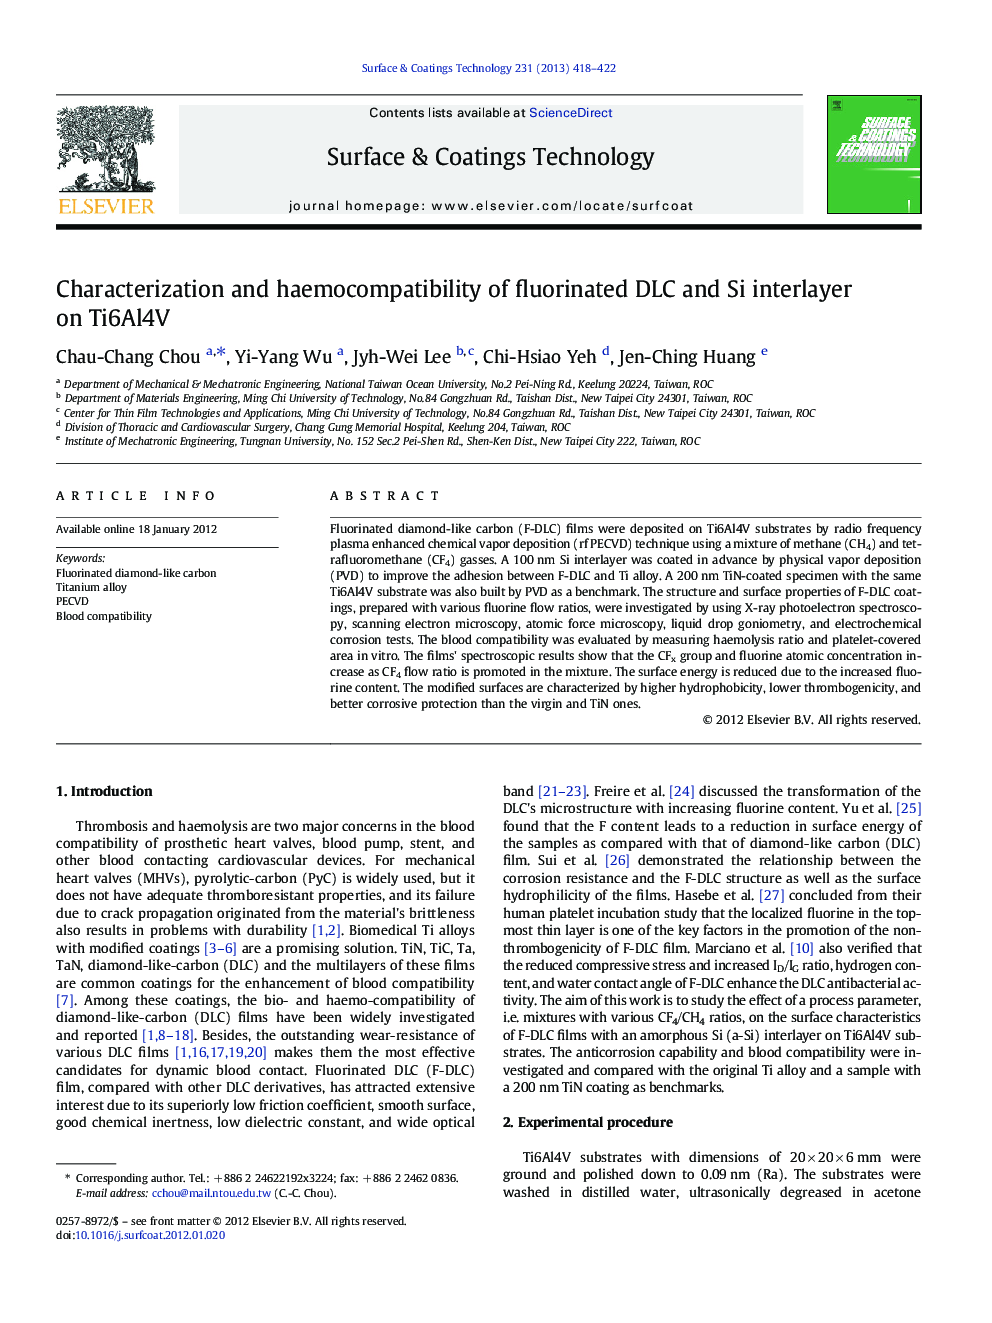 Characterization and haemocompatibility of fluorinated DLC and Si interlayer on Ti6Al4V